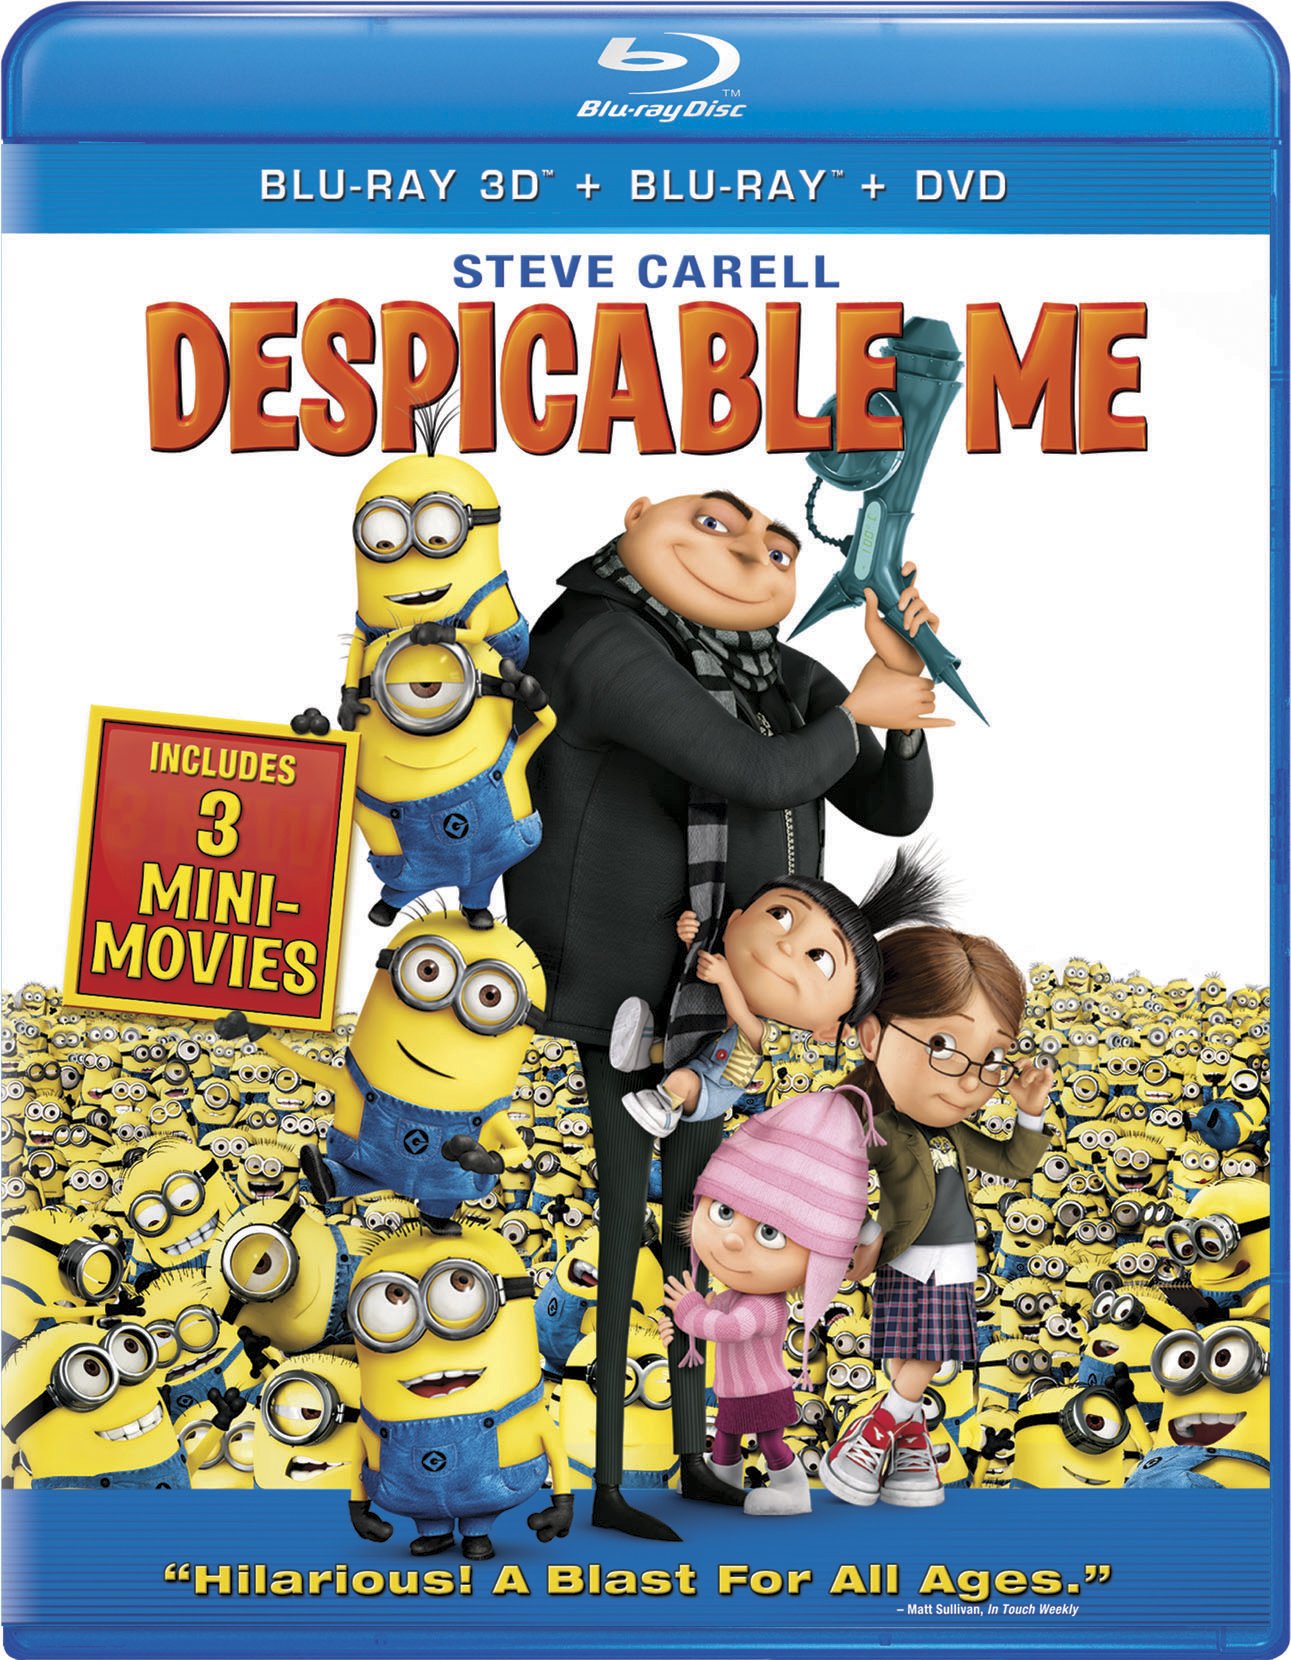 Despicable Me DVD Release Date December 14, 2010